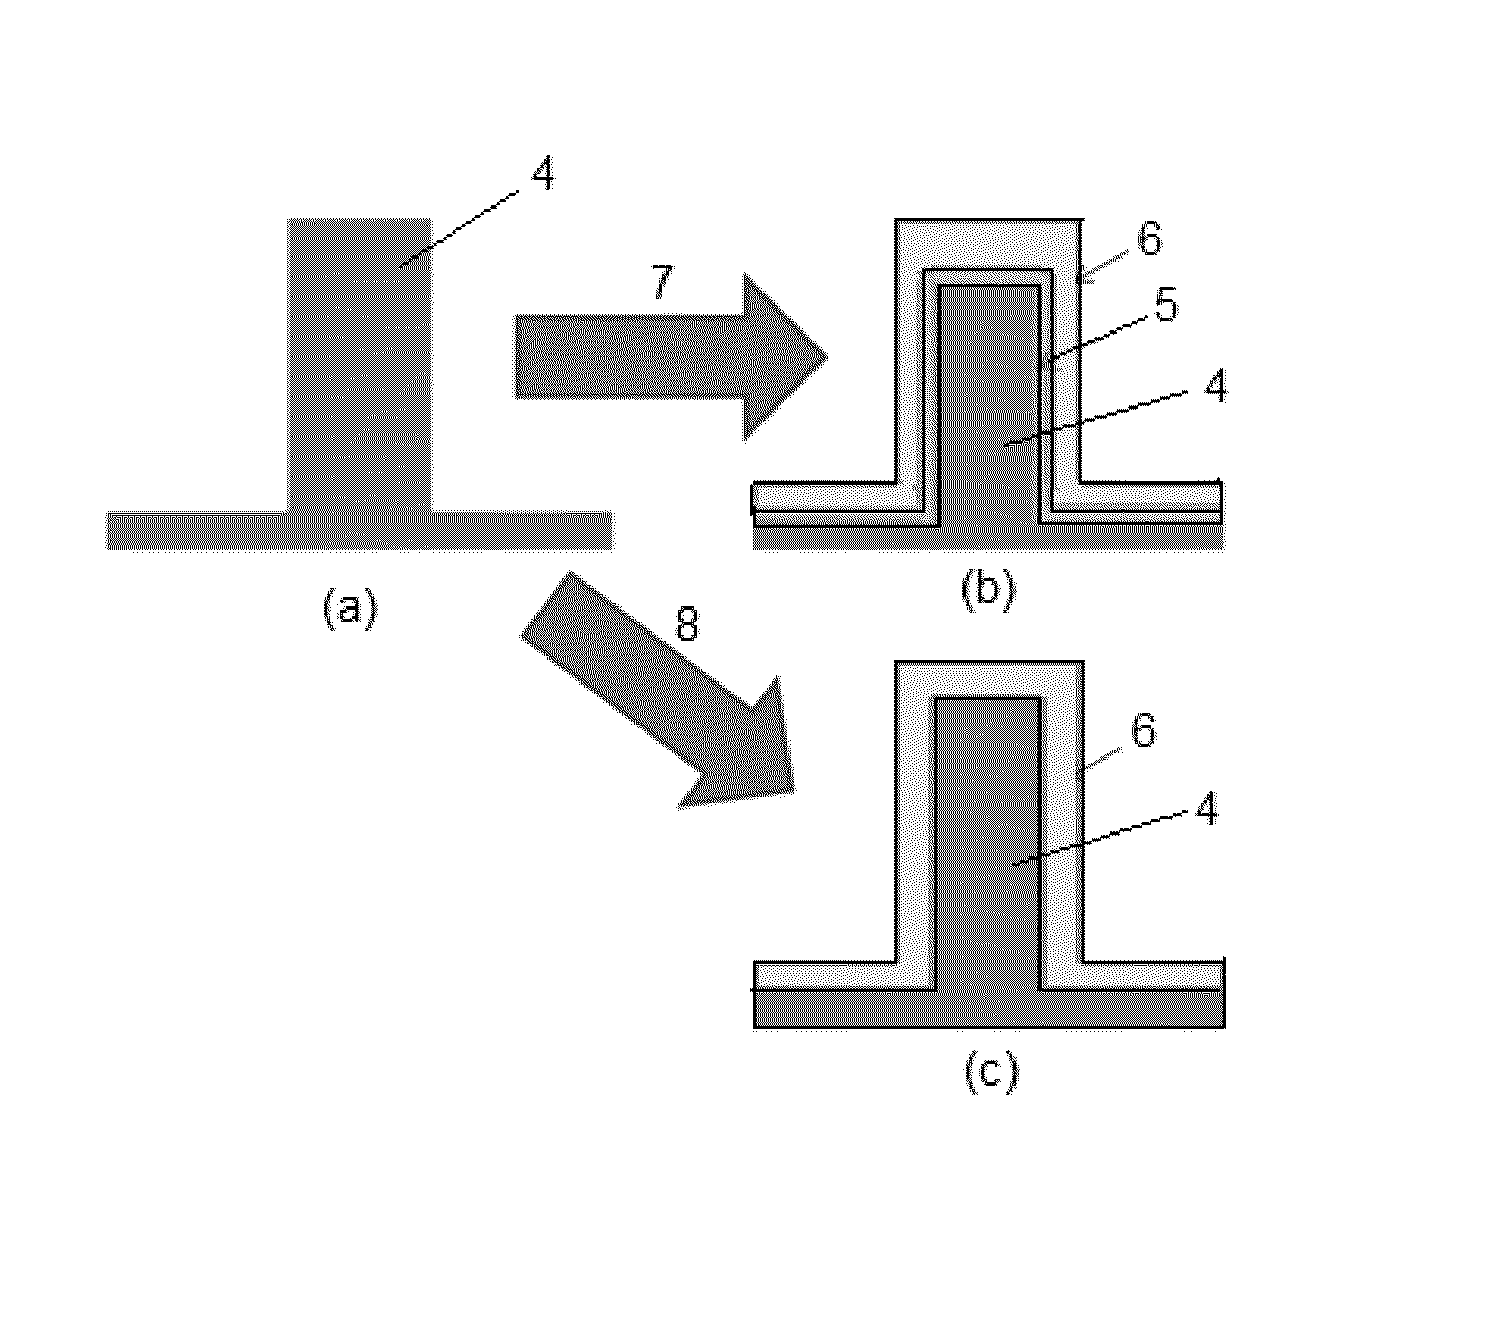 Low-Oxidation Plasma-Assisted Process